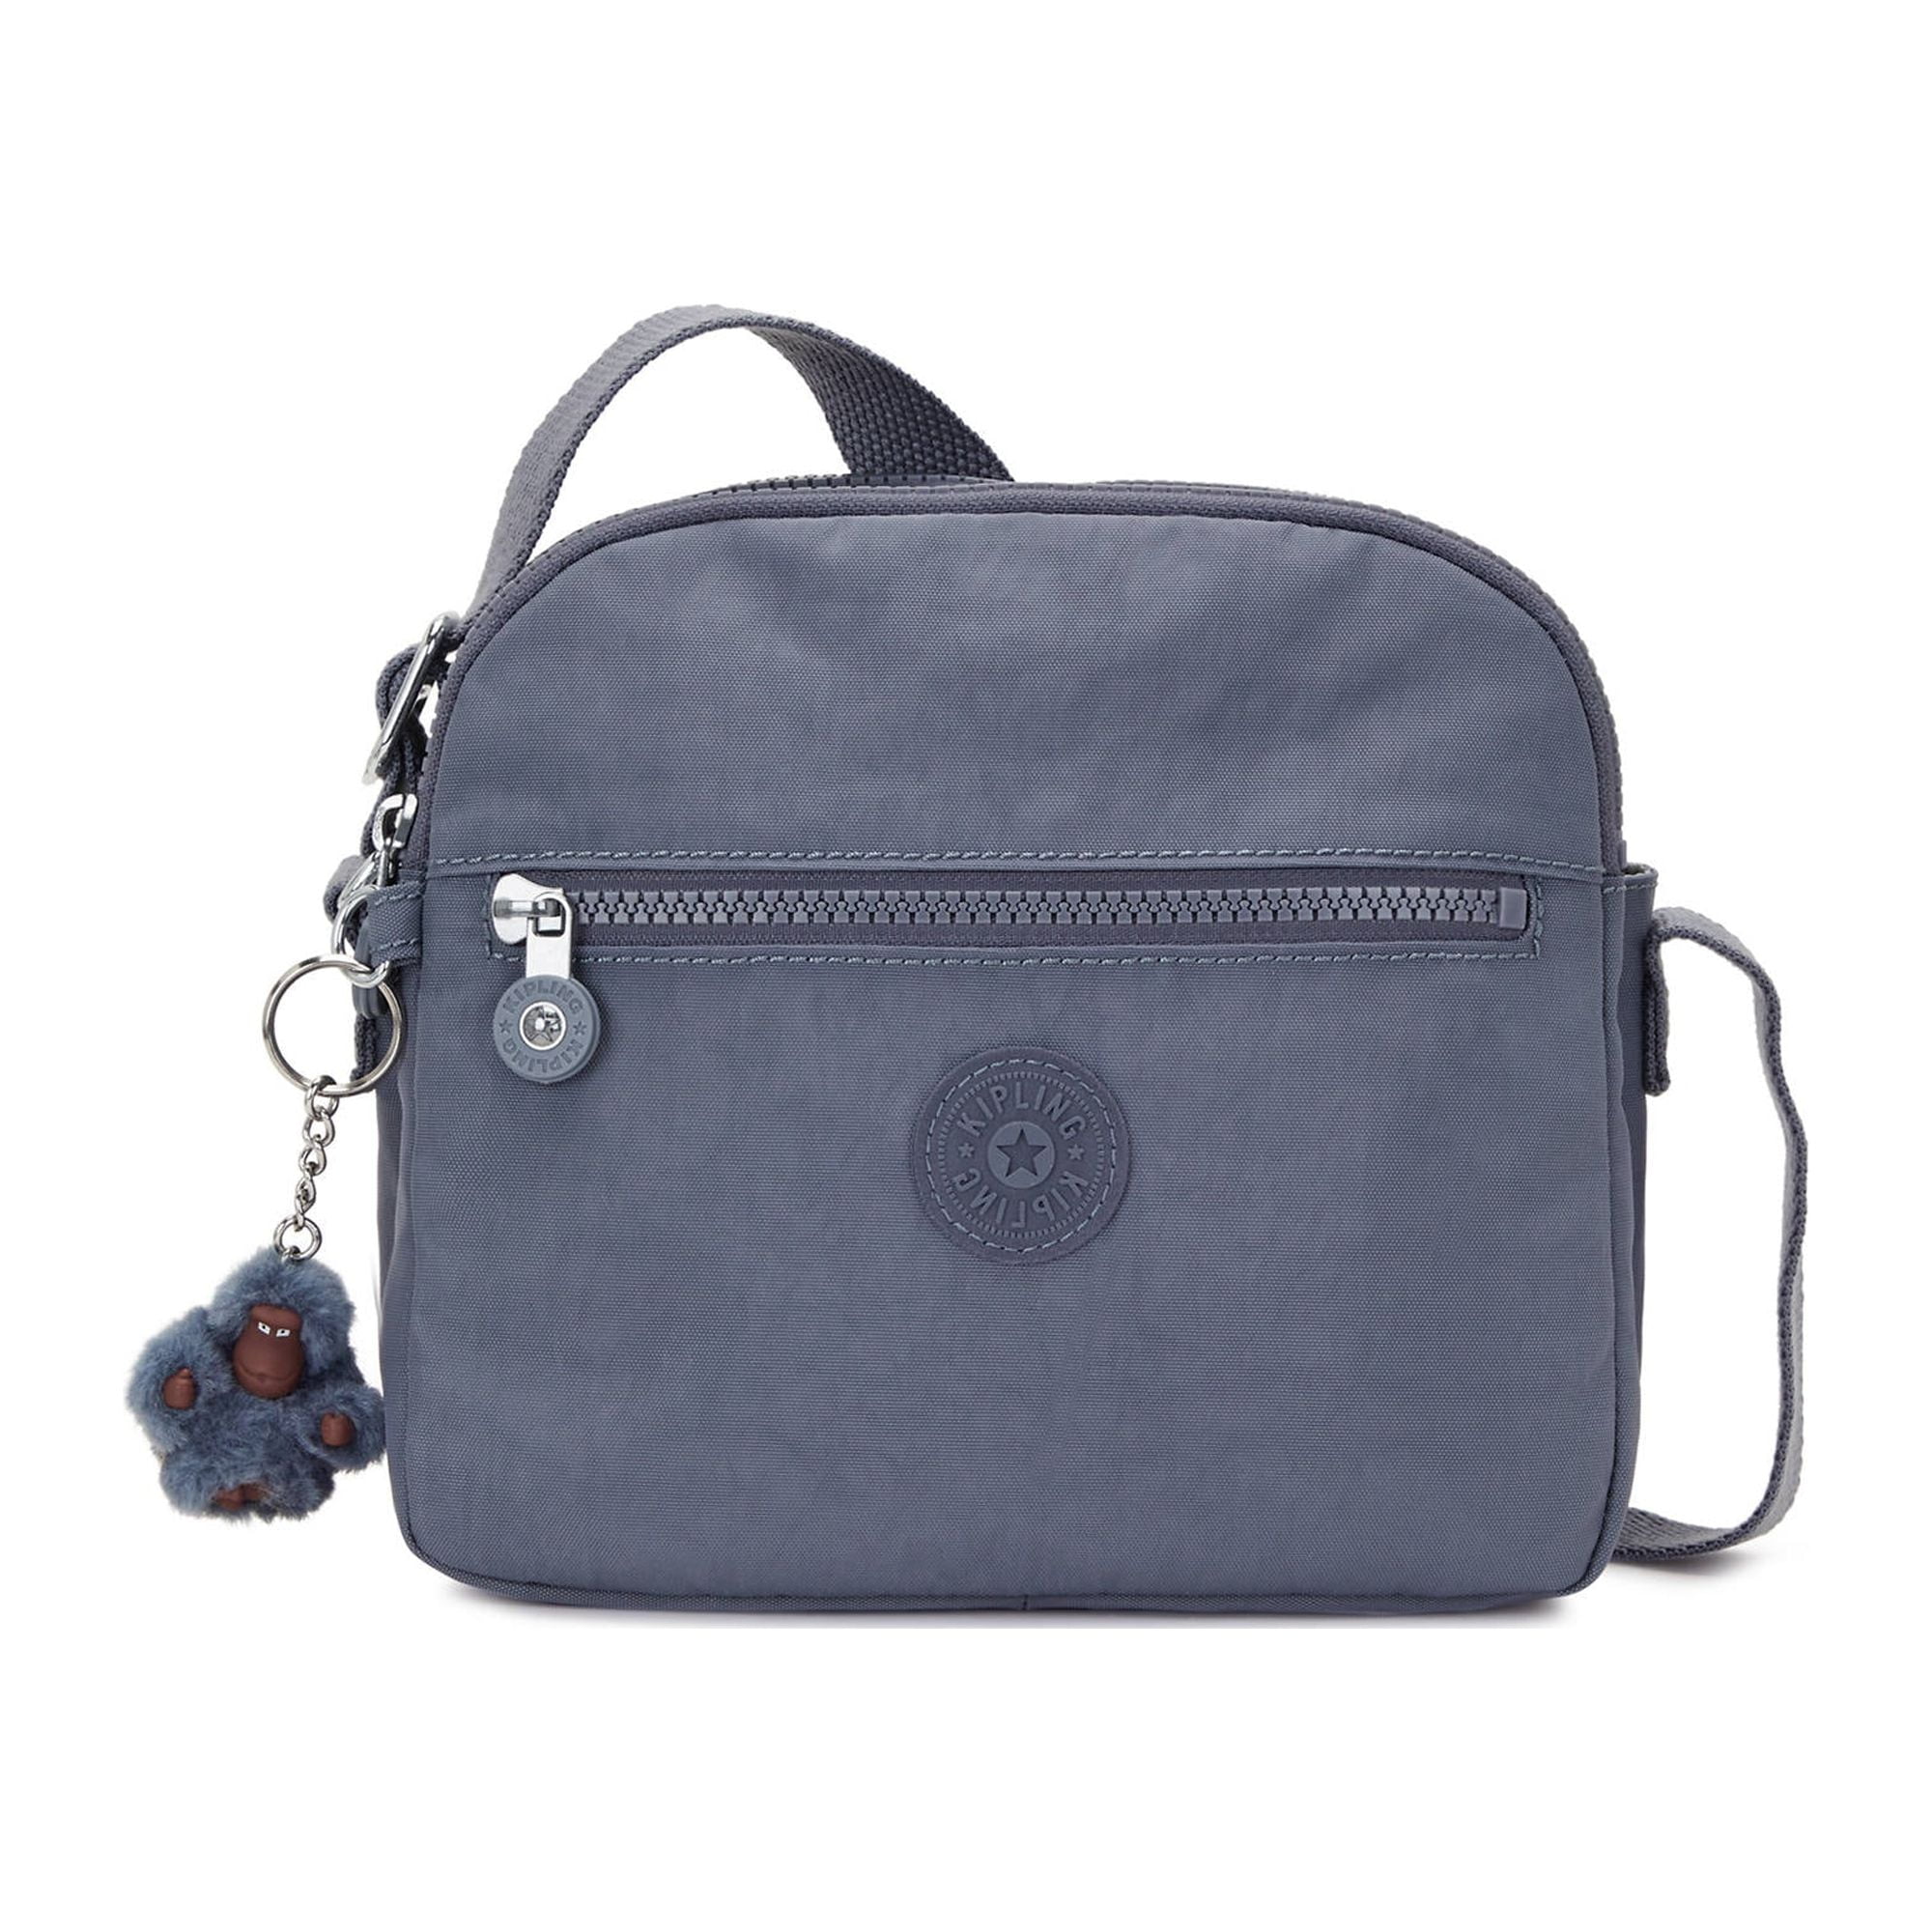 Kipling Women's Keefe Crossbody Bag with Center Divider Compartment ...